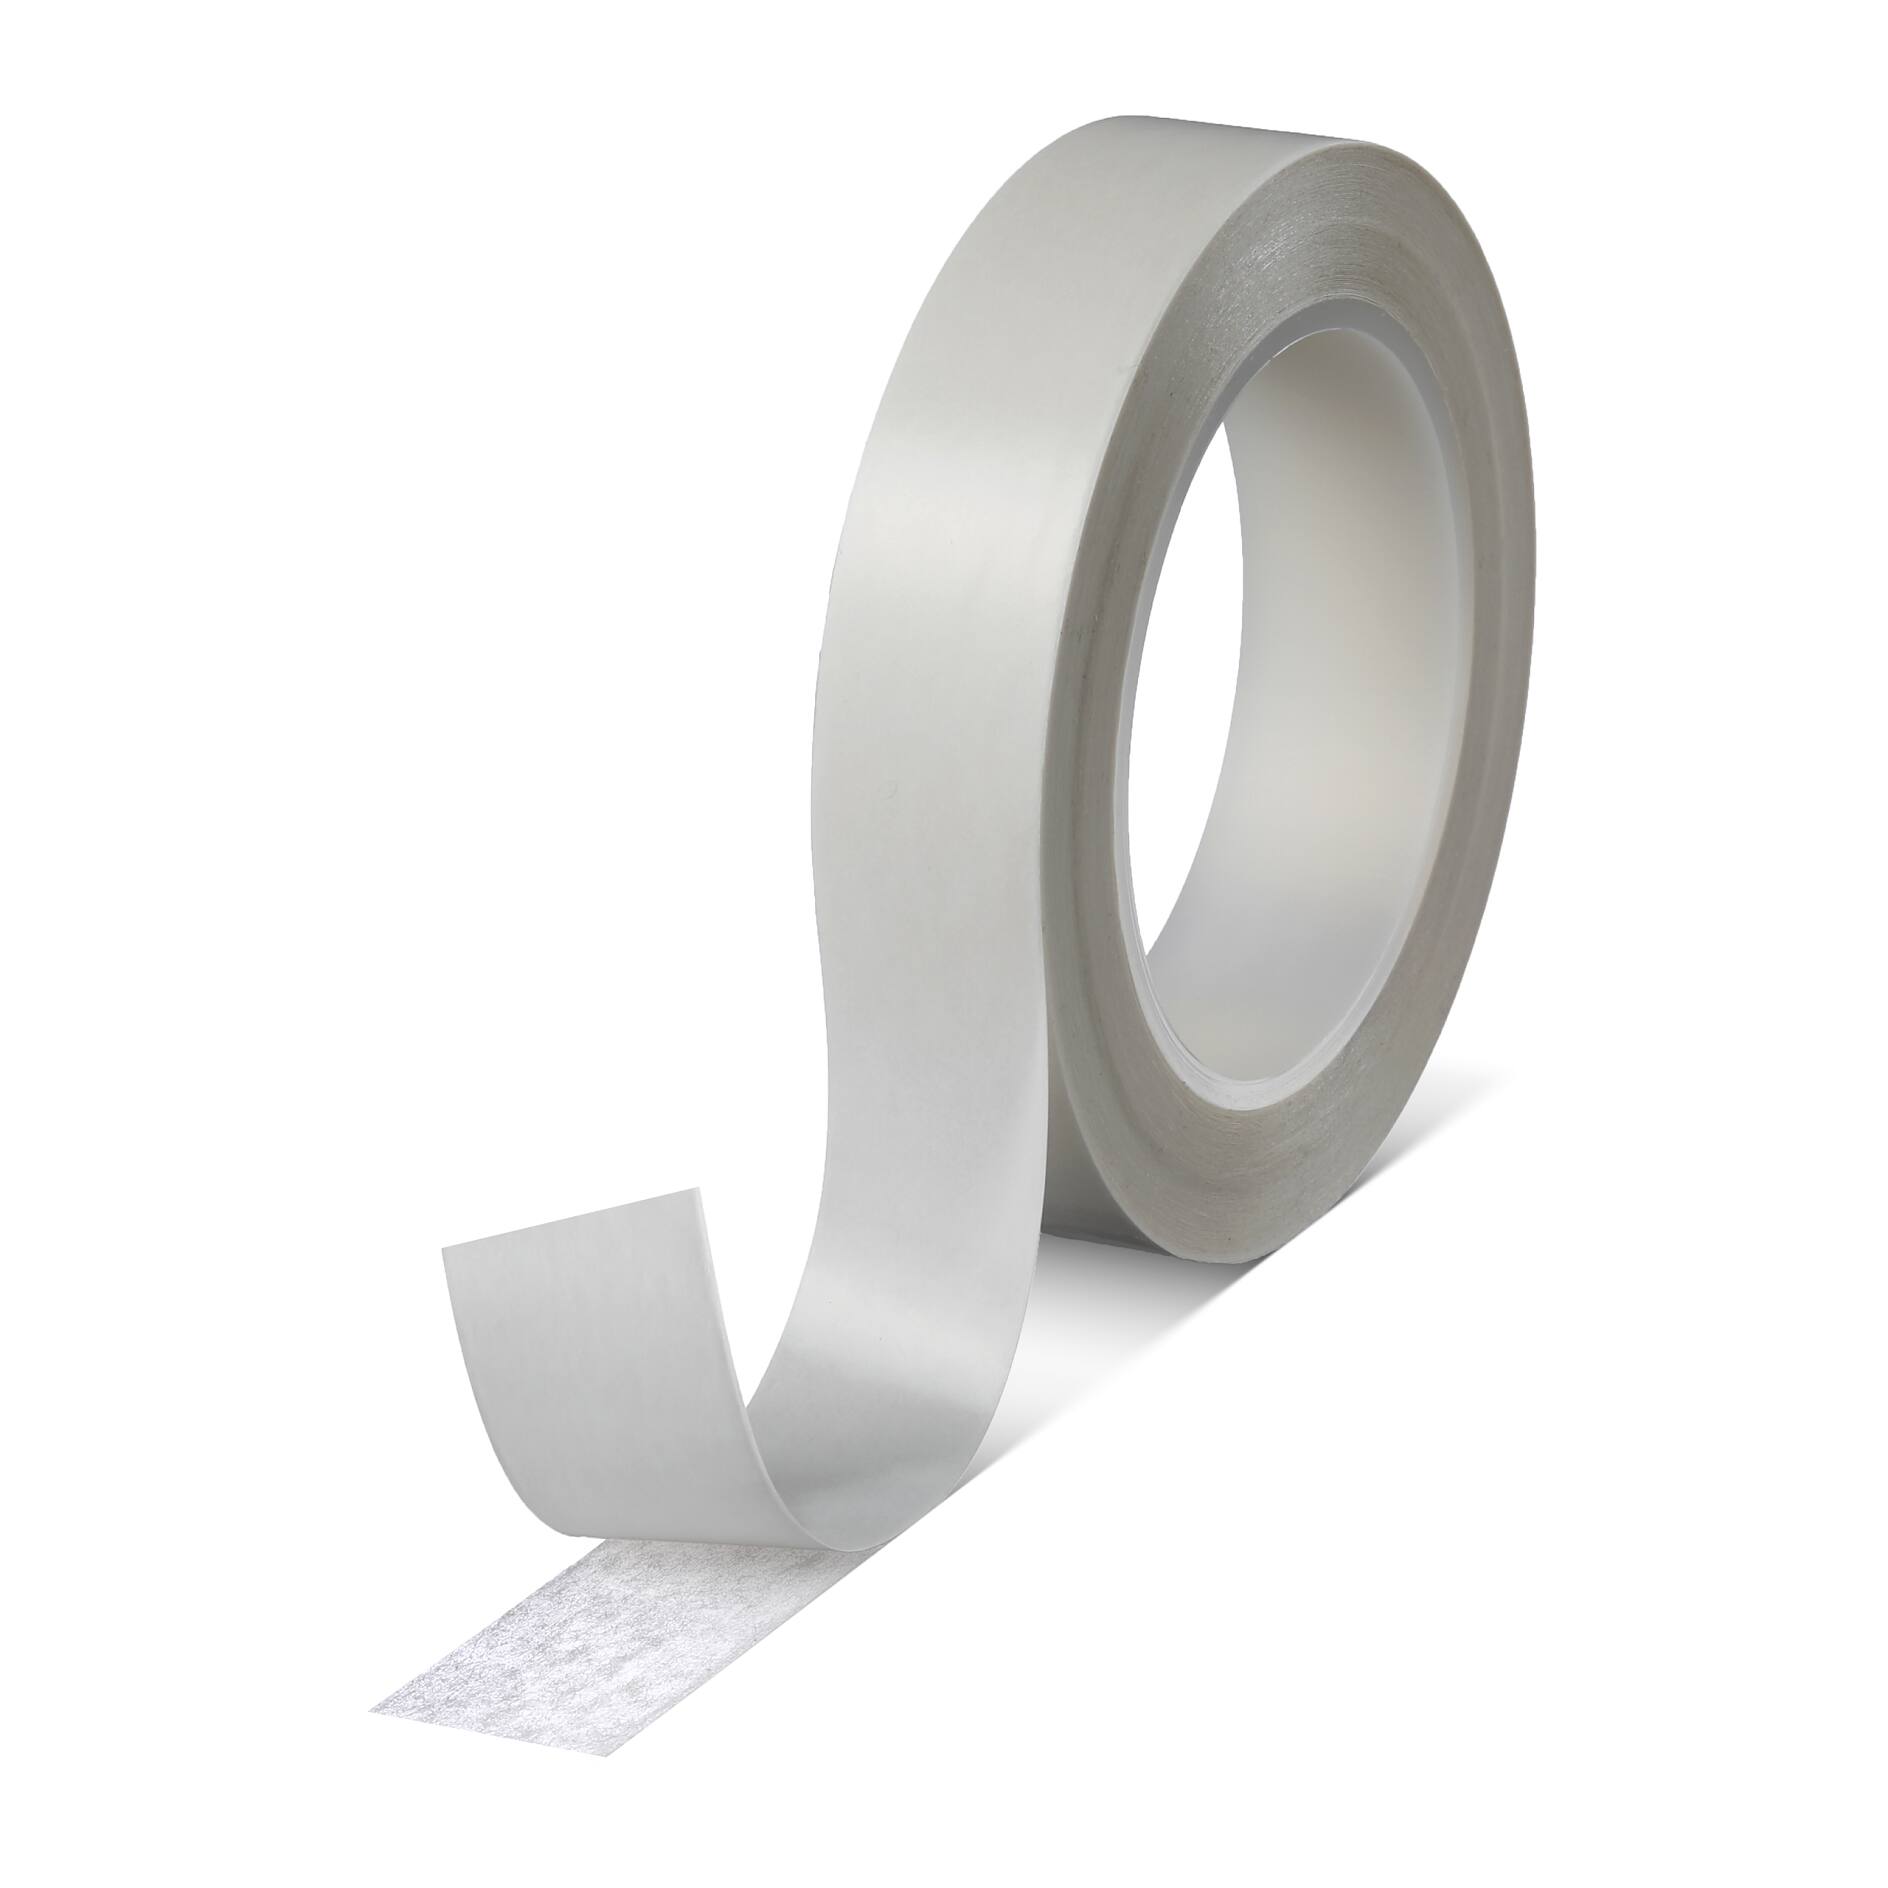 Double Sided Mounting Tape: tesa® 51970: FREE S&H No Min Order